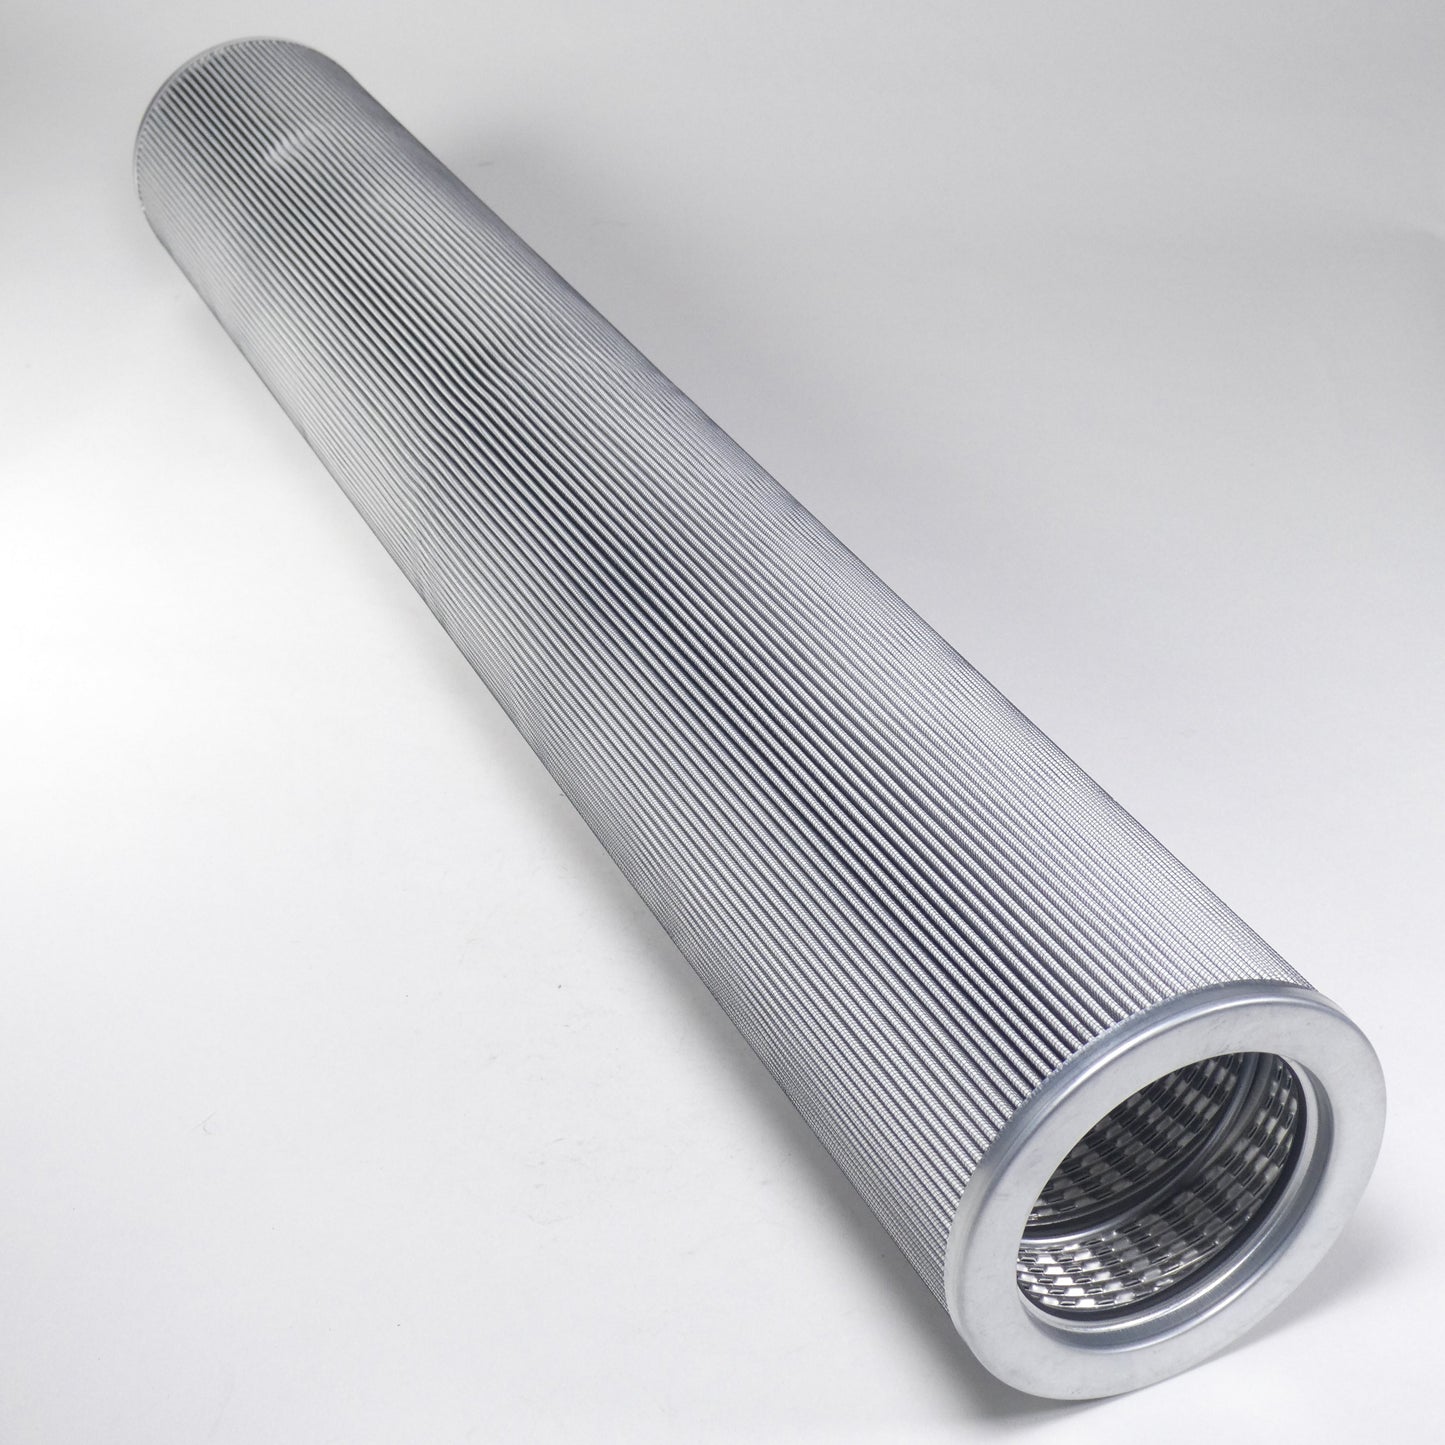 Hydrafil Replacement Filter Element for Porous Media LE8339MS13V